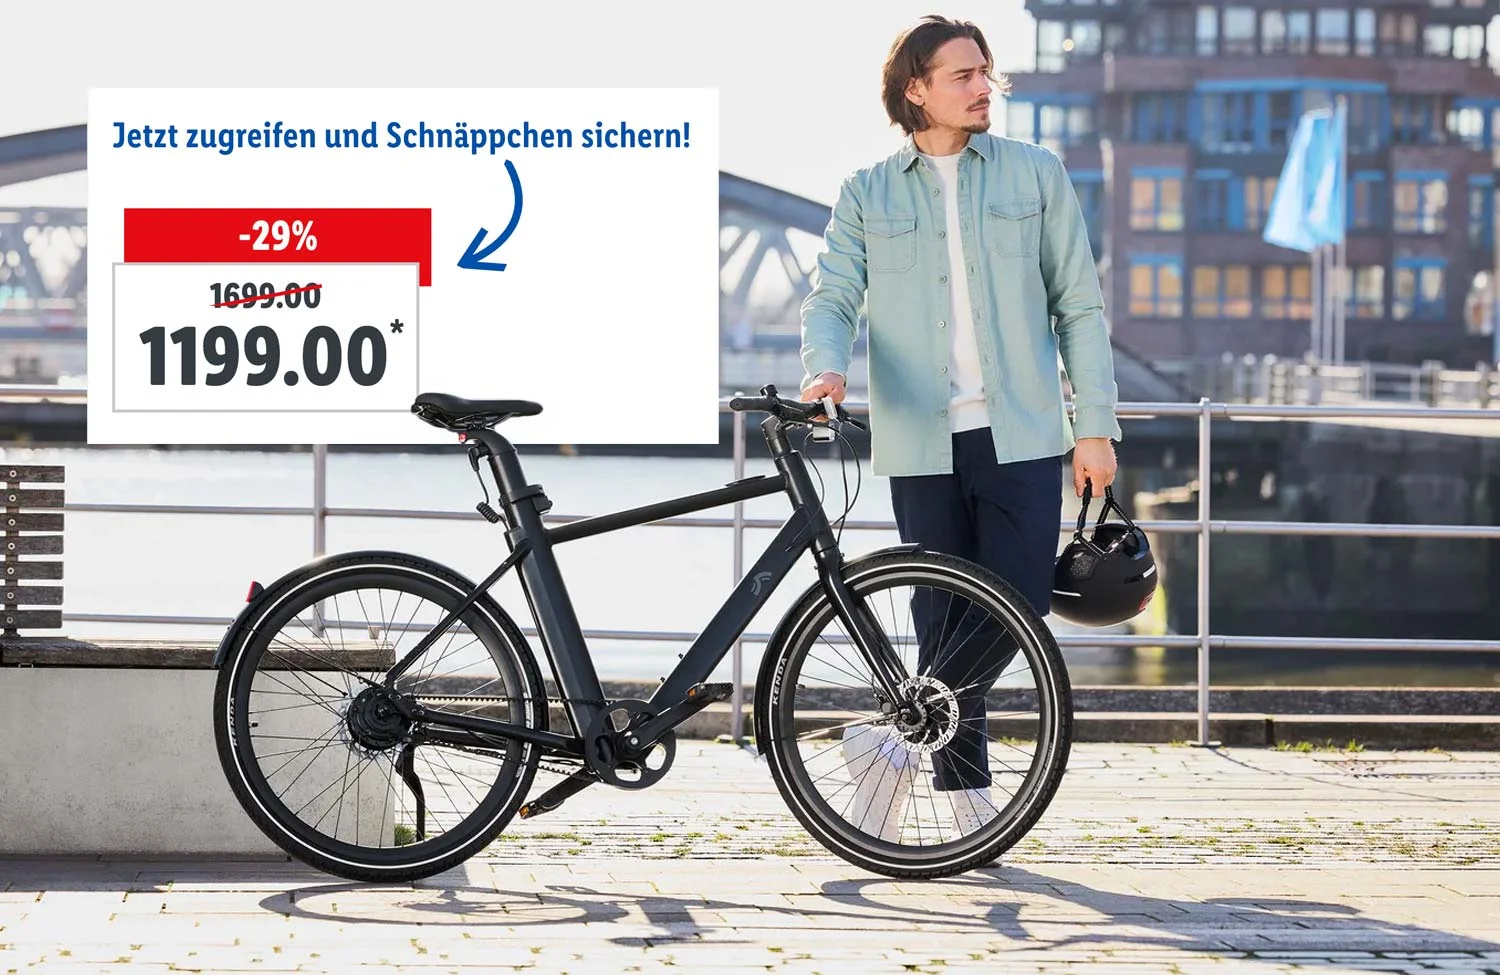 bekannte Marke On sale again: euros! for is 1,199 e-bike available the — Lidl currently Urban